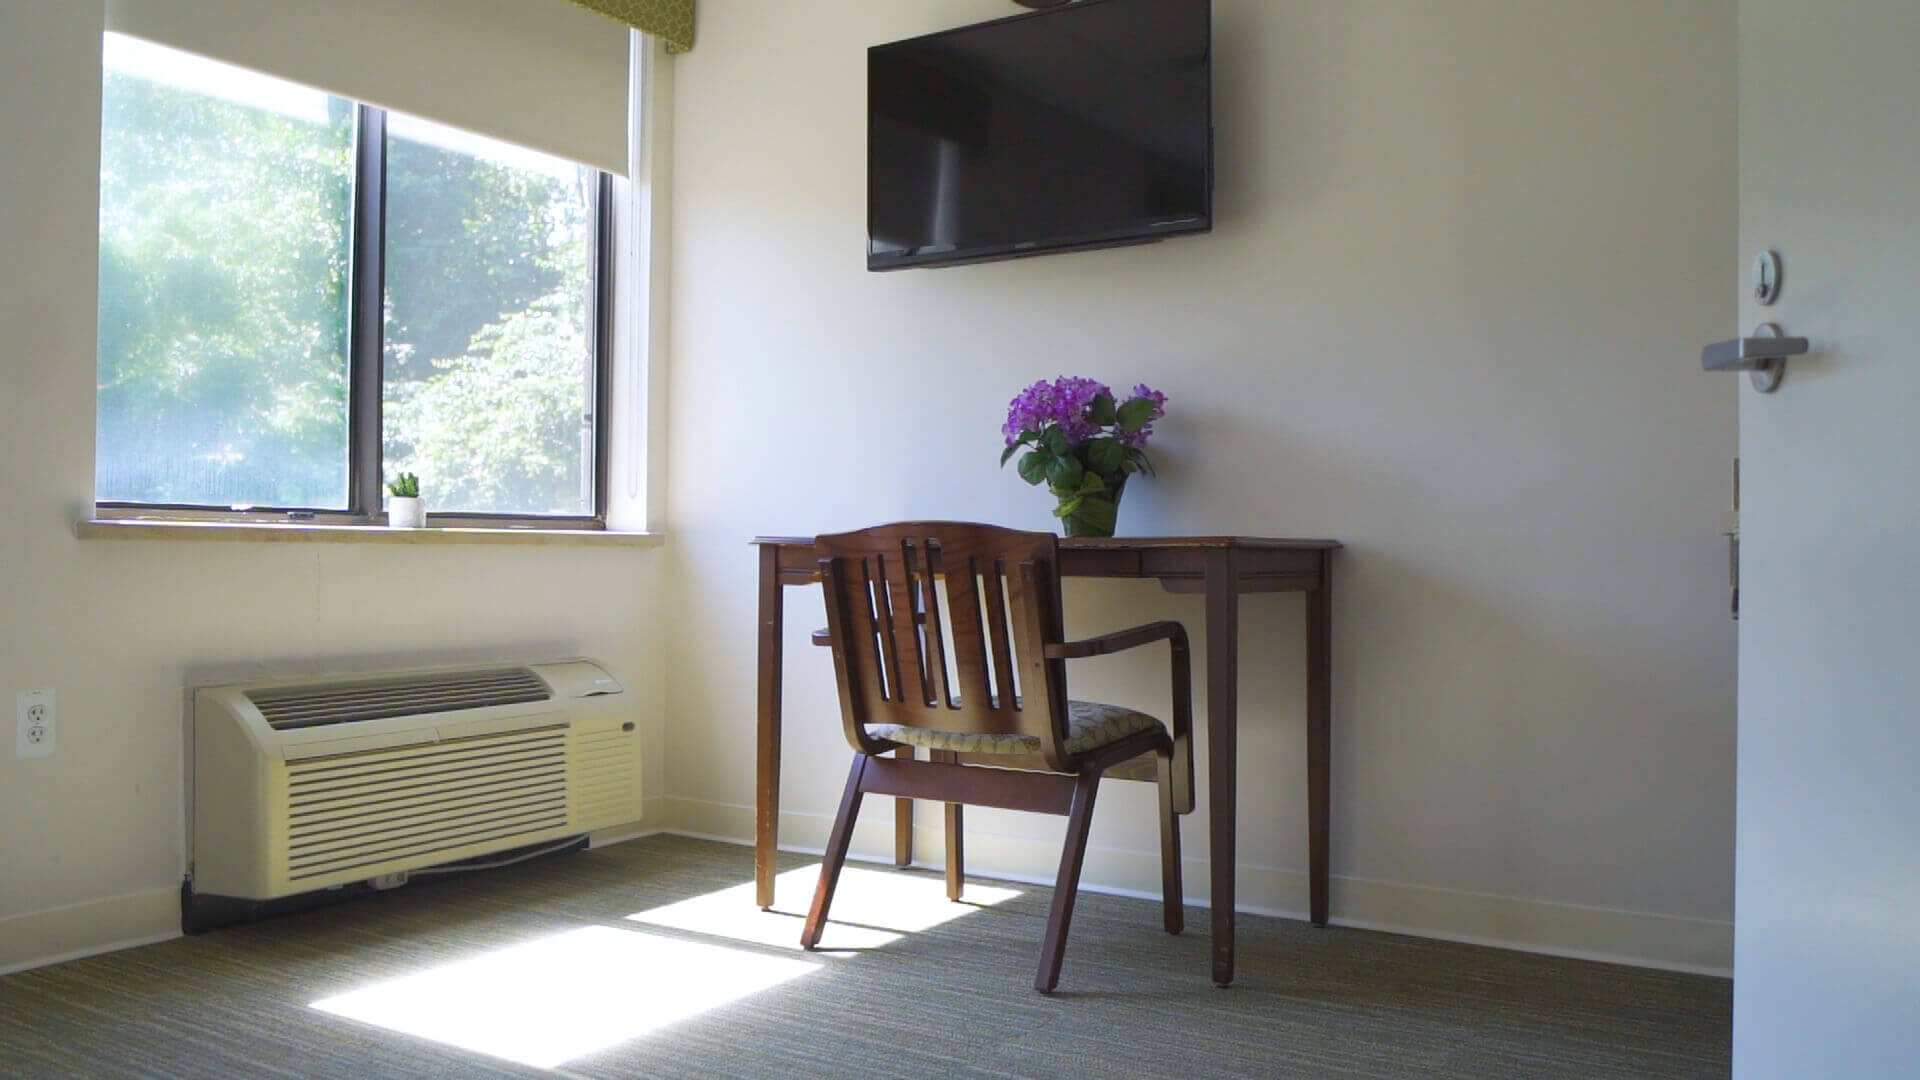 Table with flower vase and chair. Television on the wall and air-condition and one window.